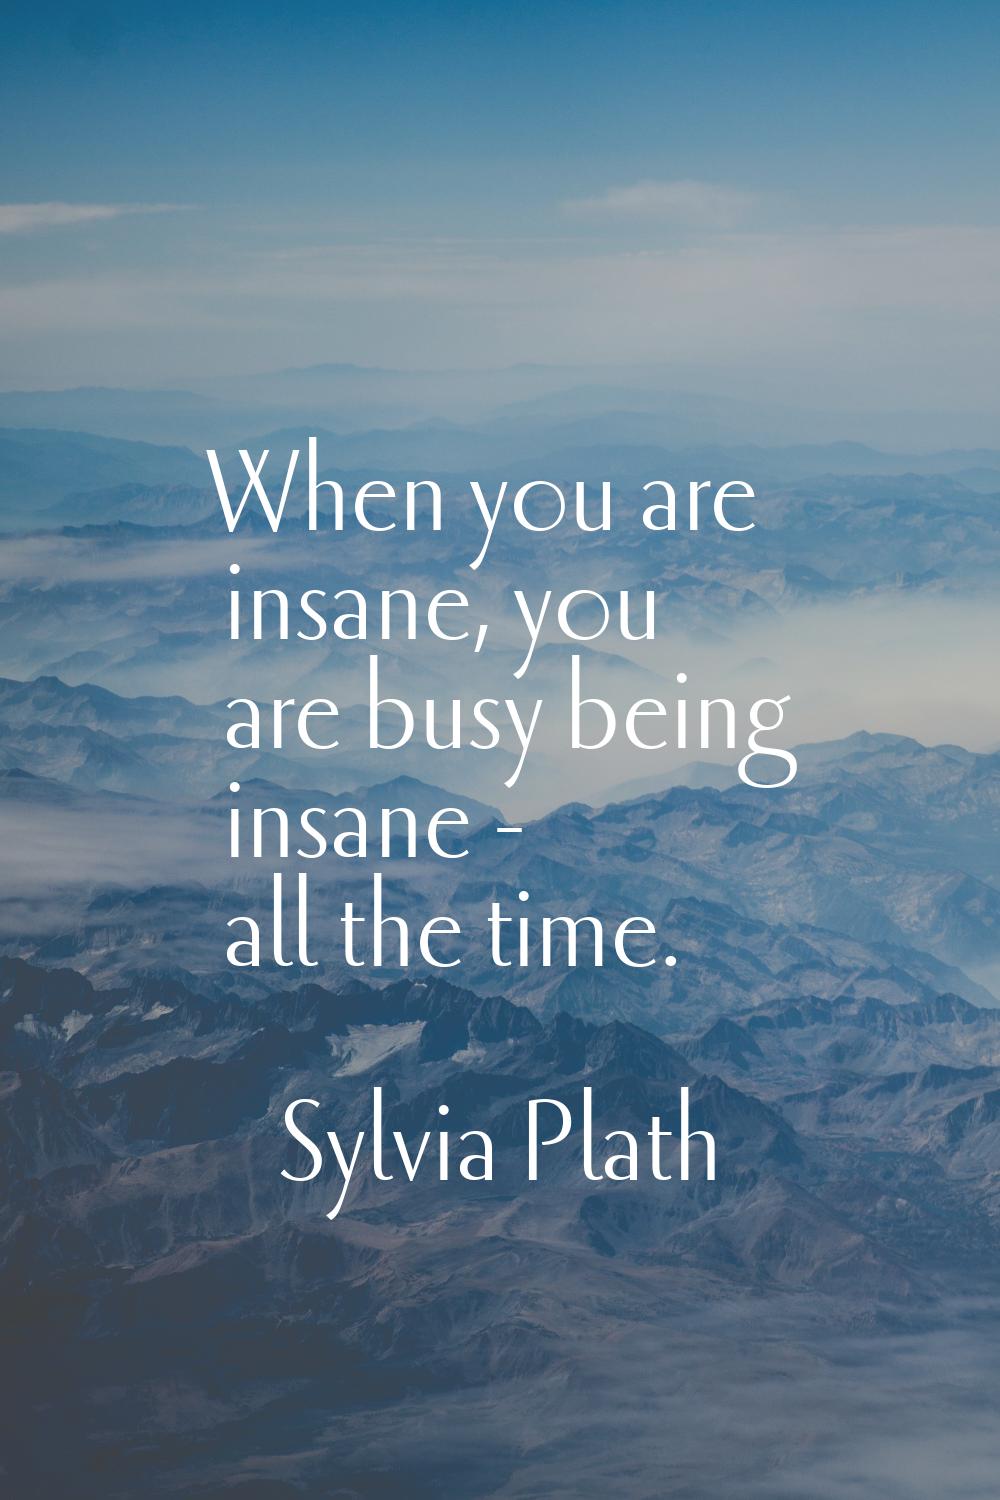 When you are insane, you are busy being insane - all the time.